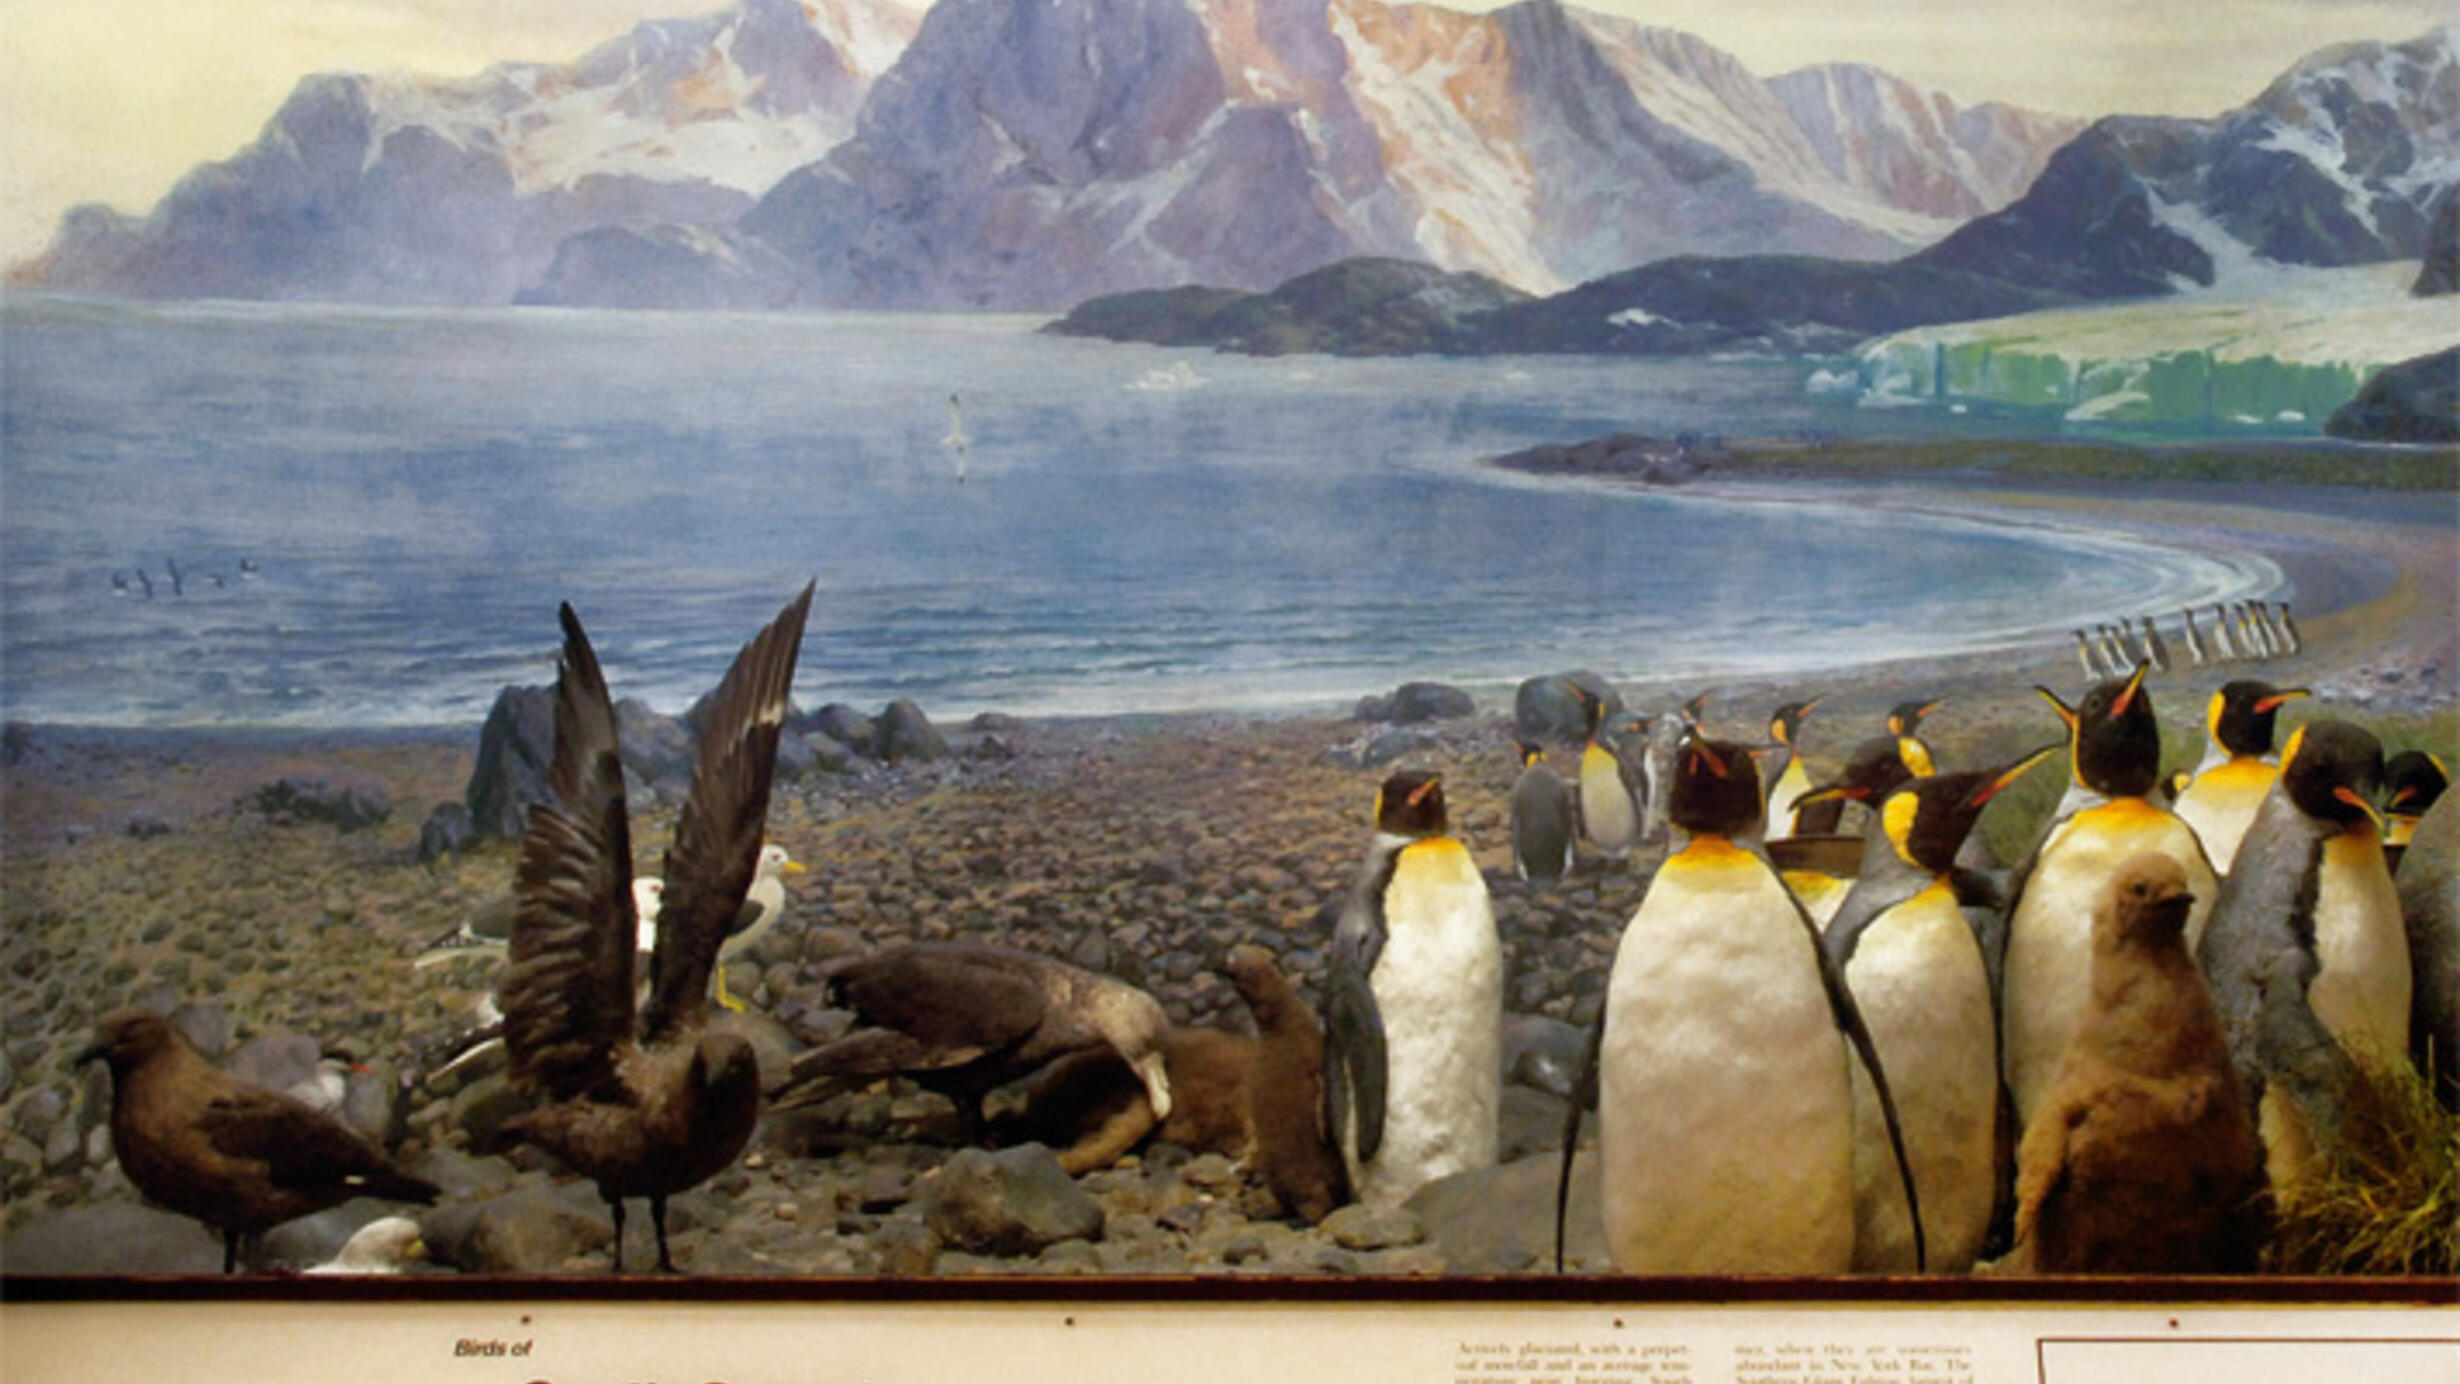 The diorama with king penguins in the Museum's Birds of the World Exhibition showing a group of penguins and a landscape of mountains and coastline in the background.